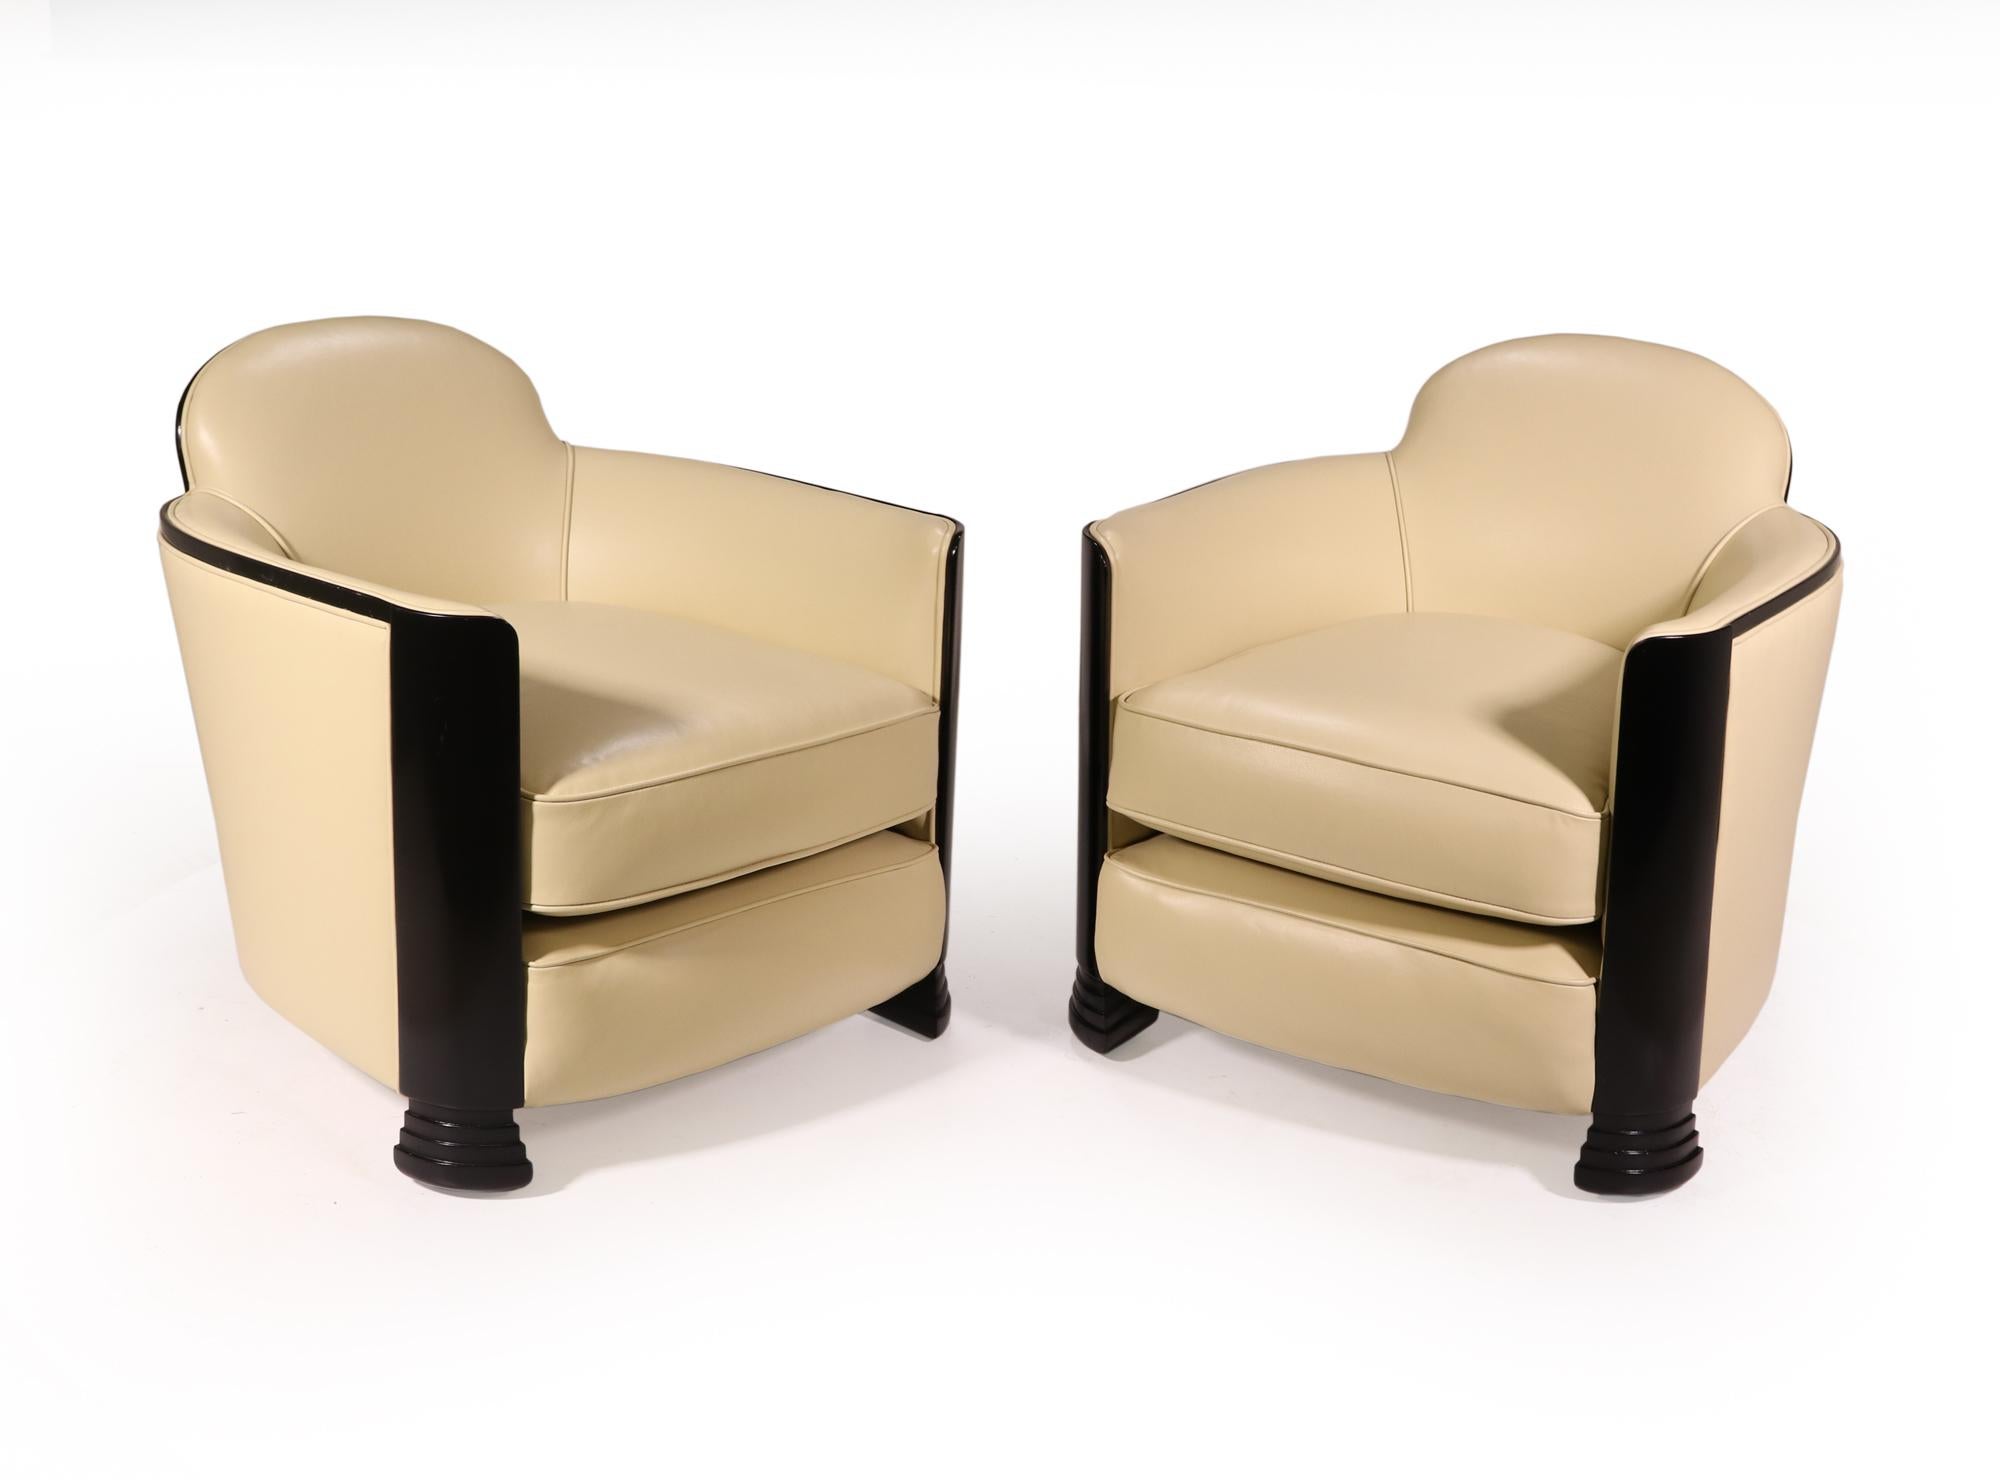 A pair of armchairs produced in the 1930’s in the manner of Jules Leleu the chairs have stepped front fee with curved front uprights and show wood trim that has all been recently polished and is in exceptional condition. The chairs have been fully